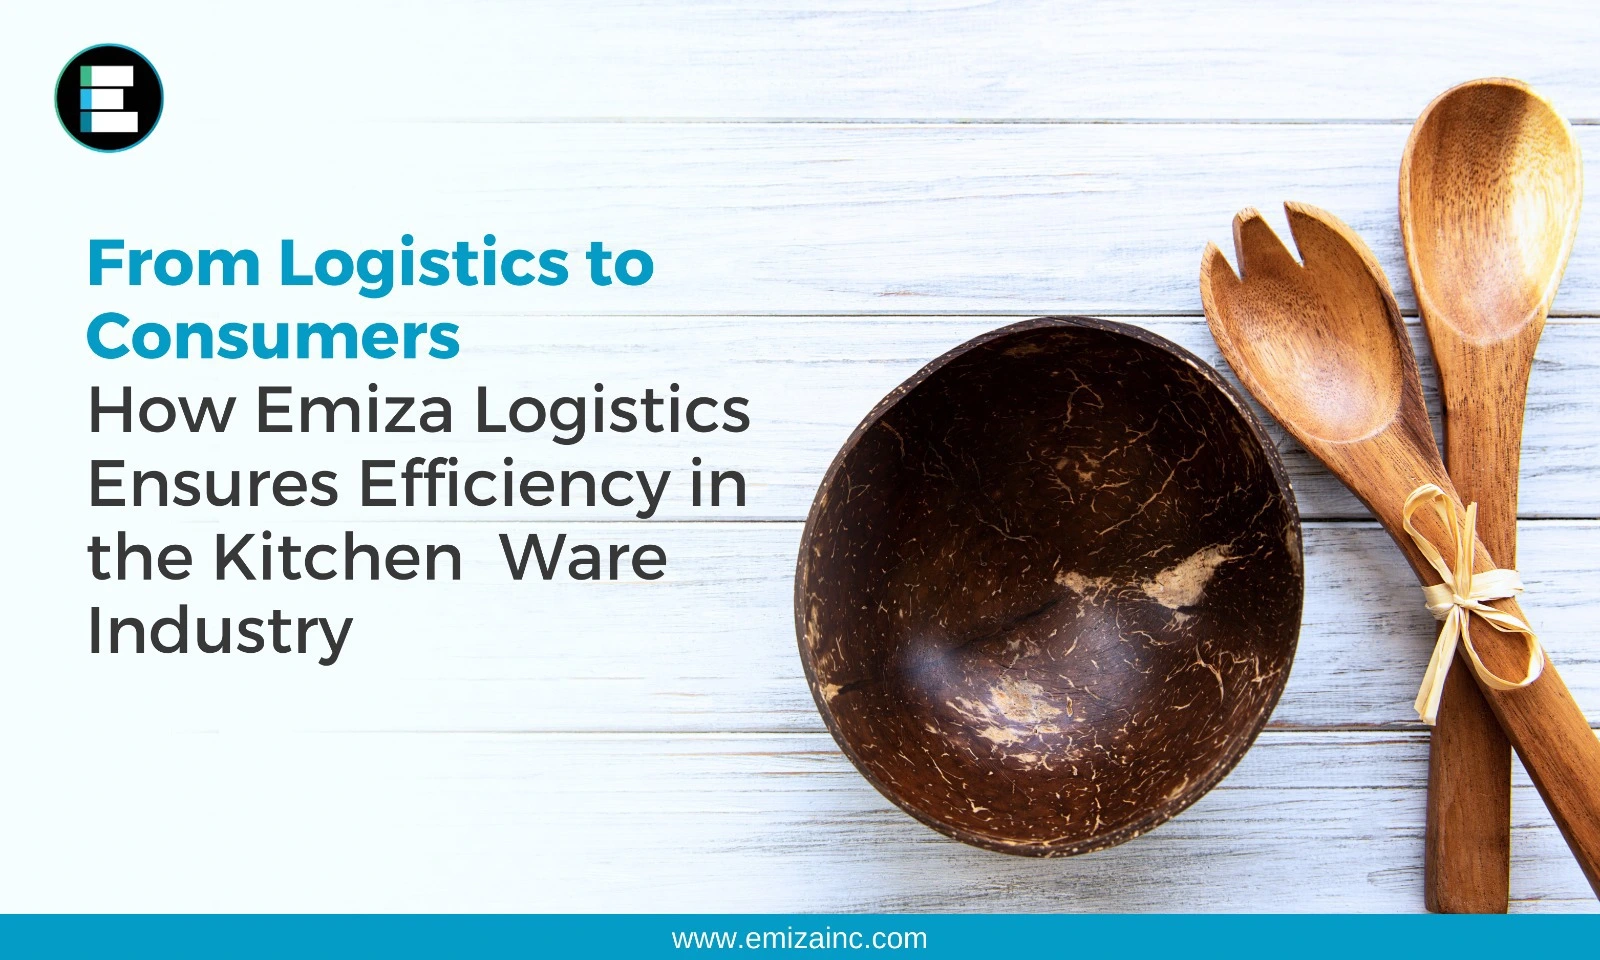 From Logistics to Consumers: How Emiza Logistics Ensures Efficiency in the kitchenware Industry